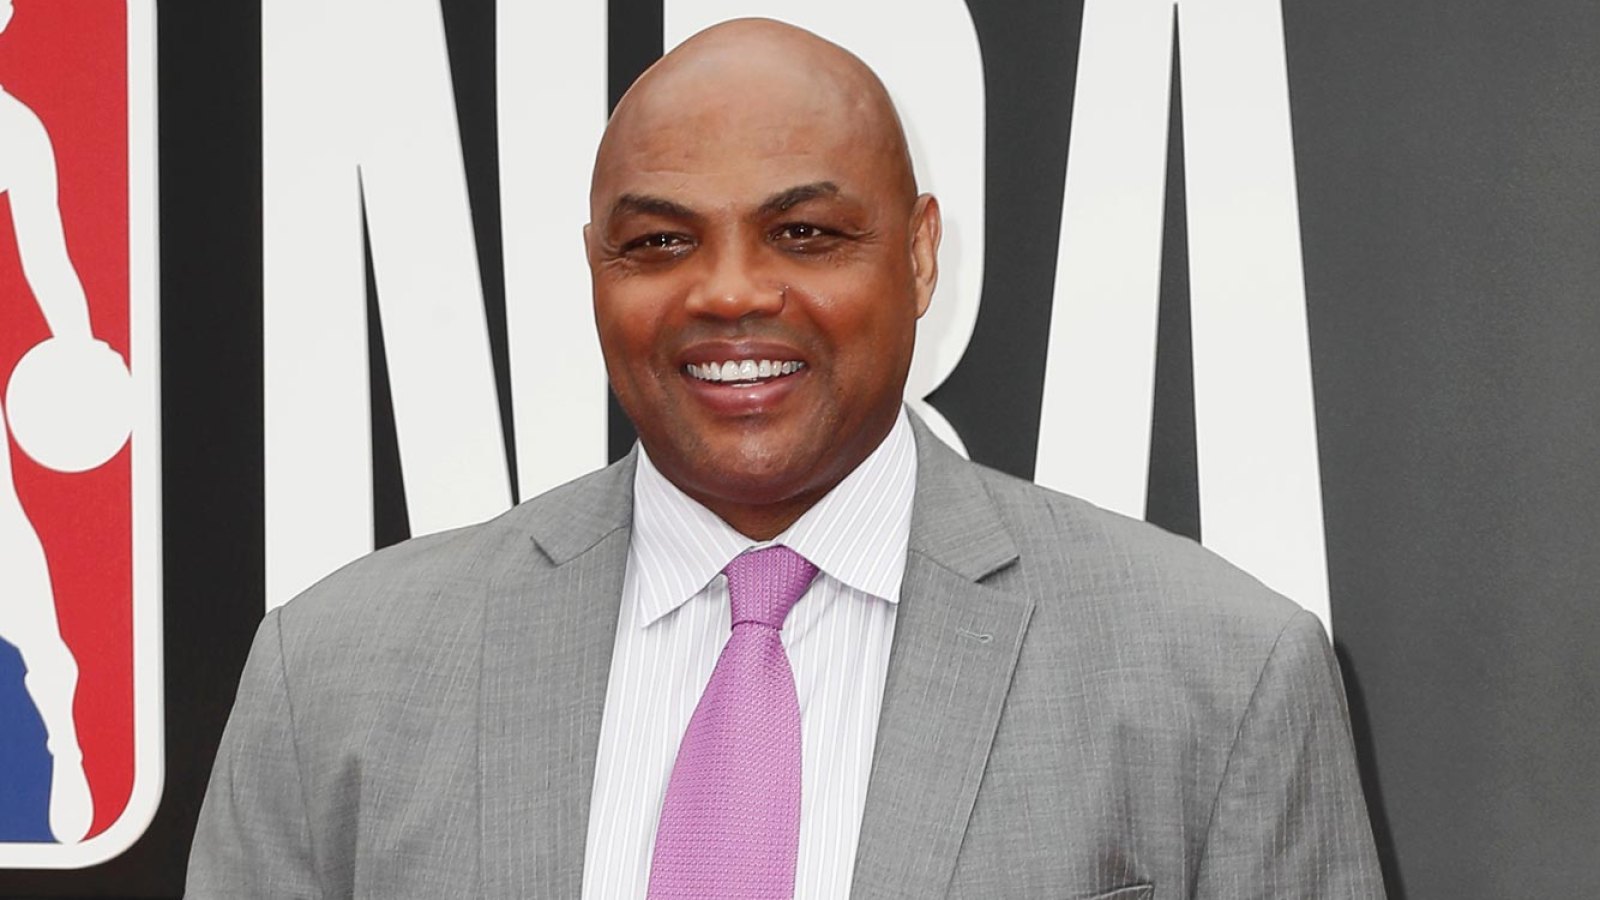 Charles-Barkley-Reveals-He-s-Lost-62-Pounds-With-Help-of-Mounjaro-Shot---I-m-Starting-to-Feel-Like-a-Human-Being--221